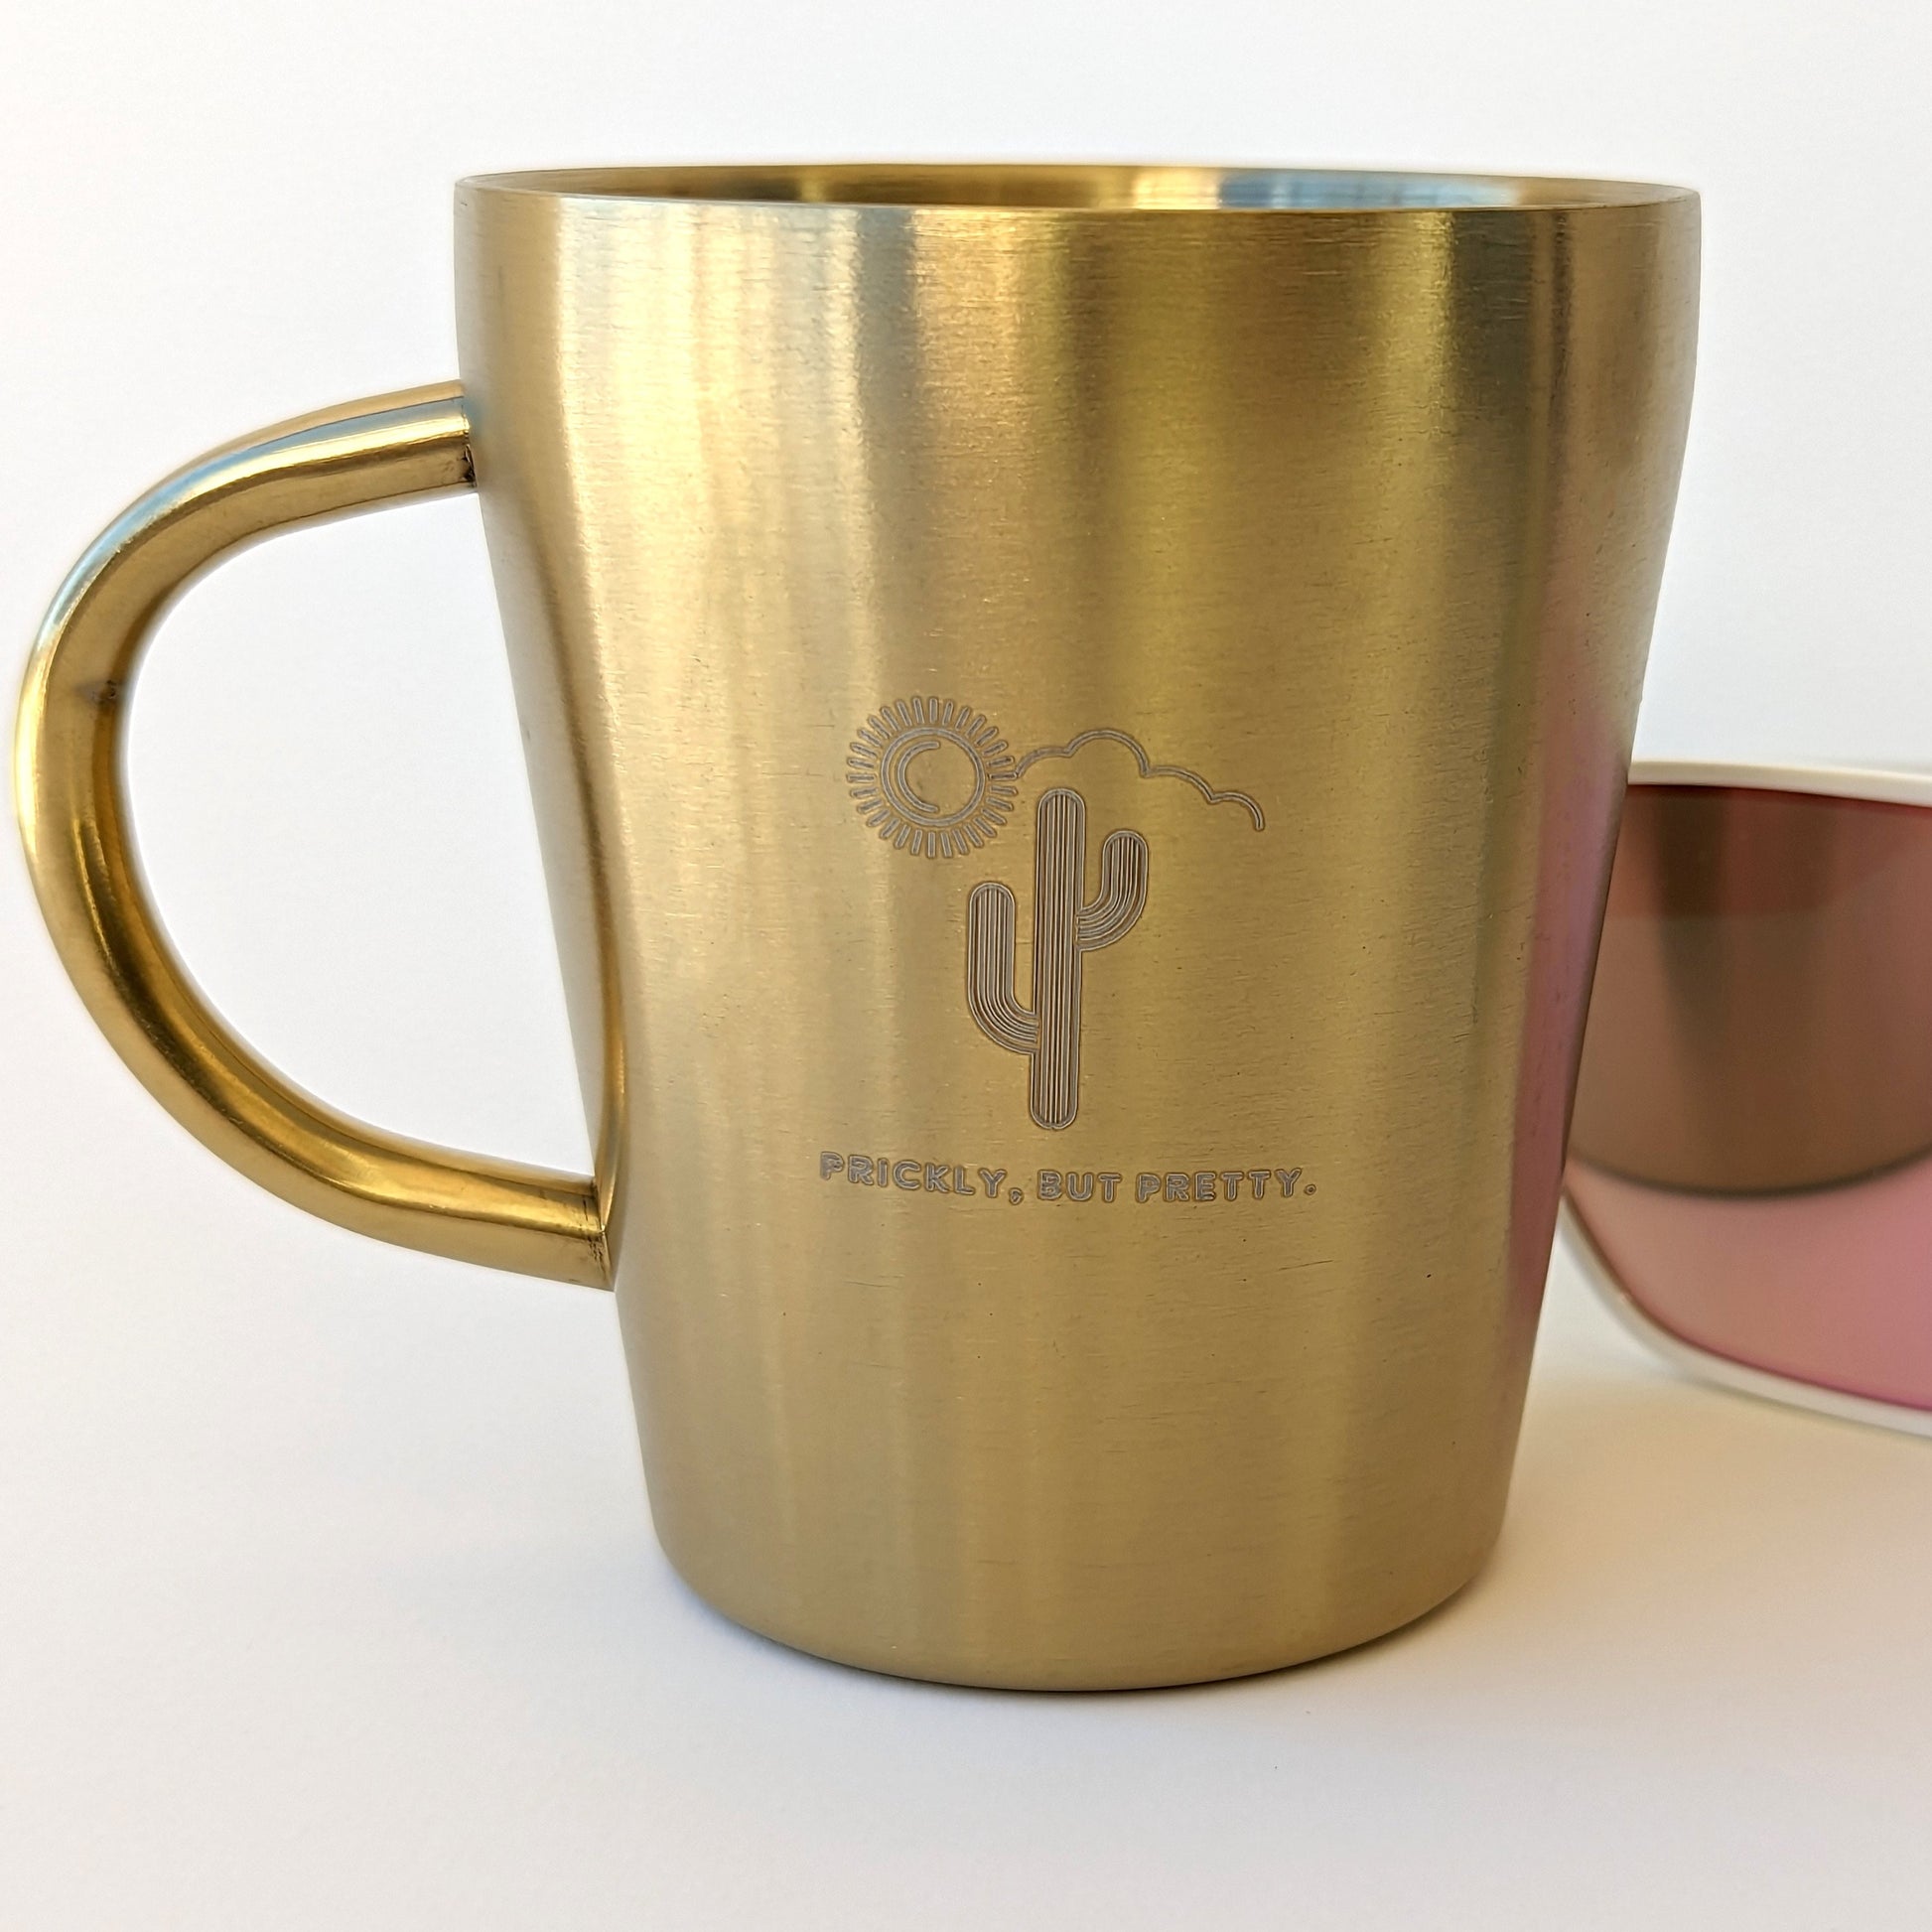 10oz Gold Insulated Stainless Steel Mug with Engraved Design